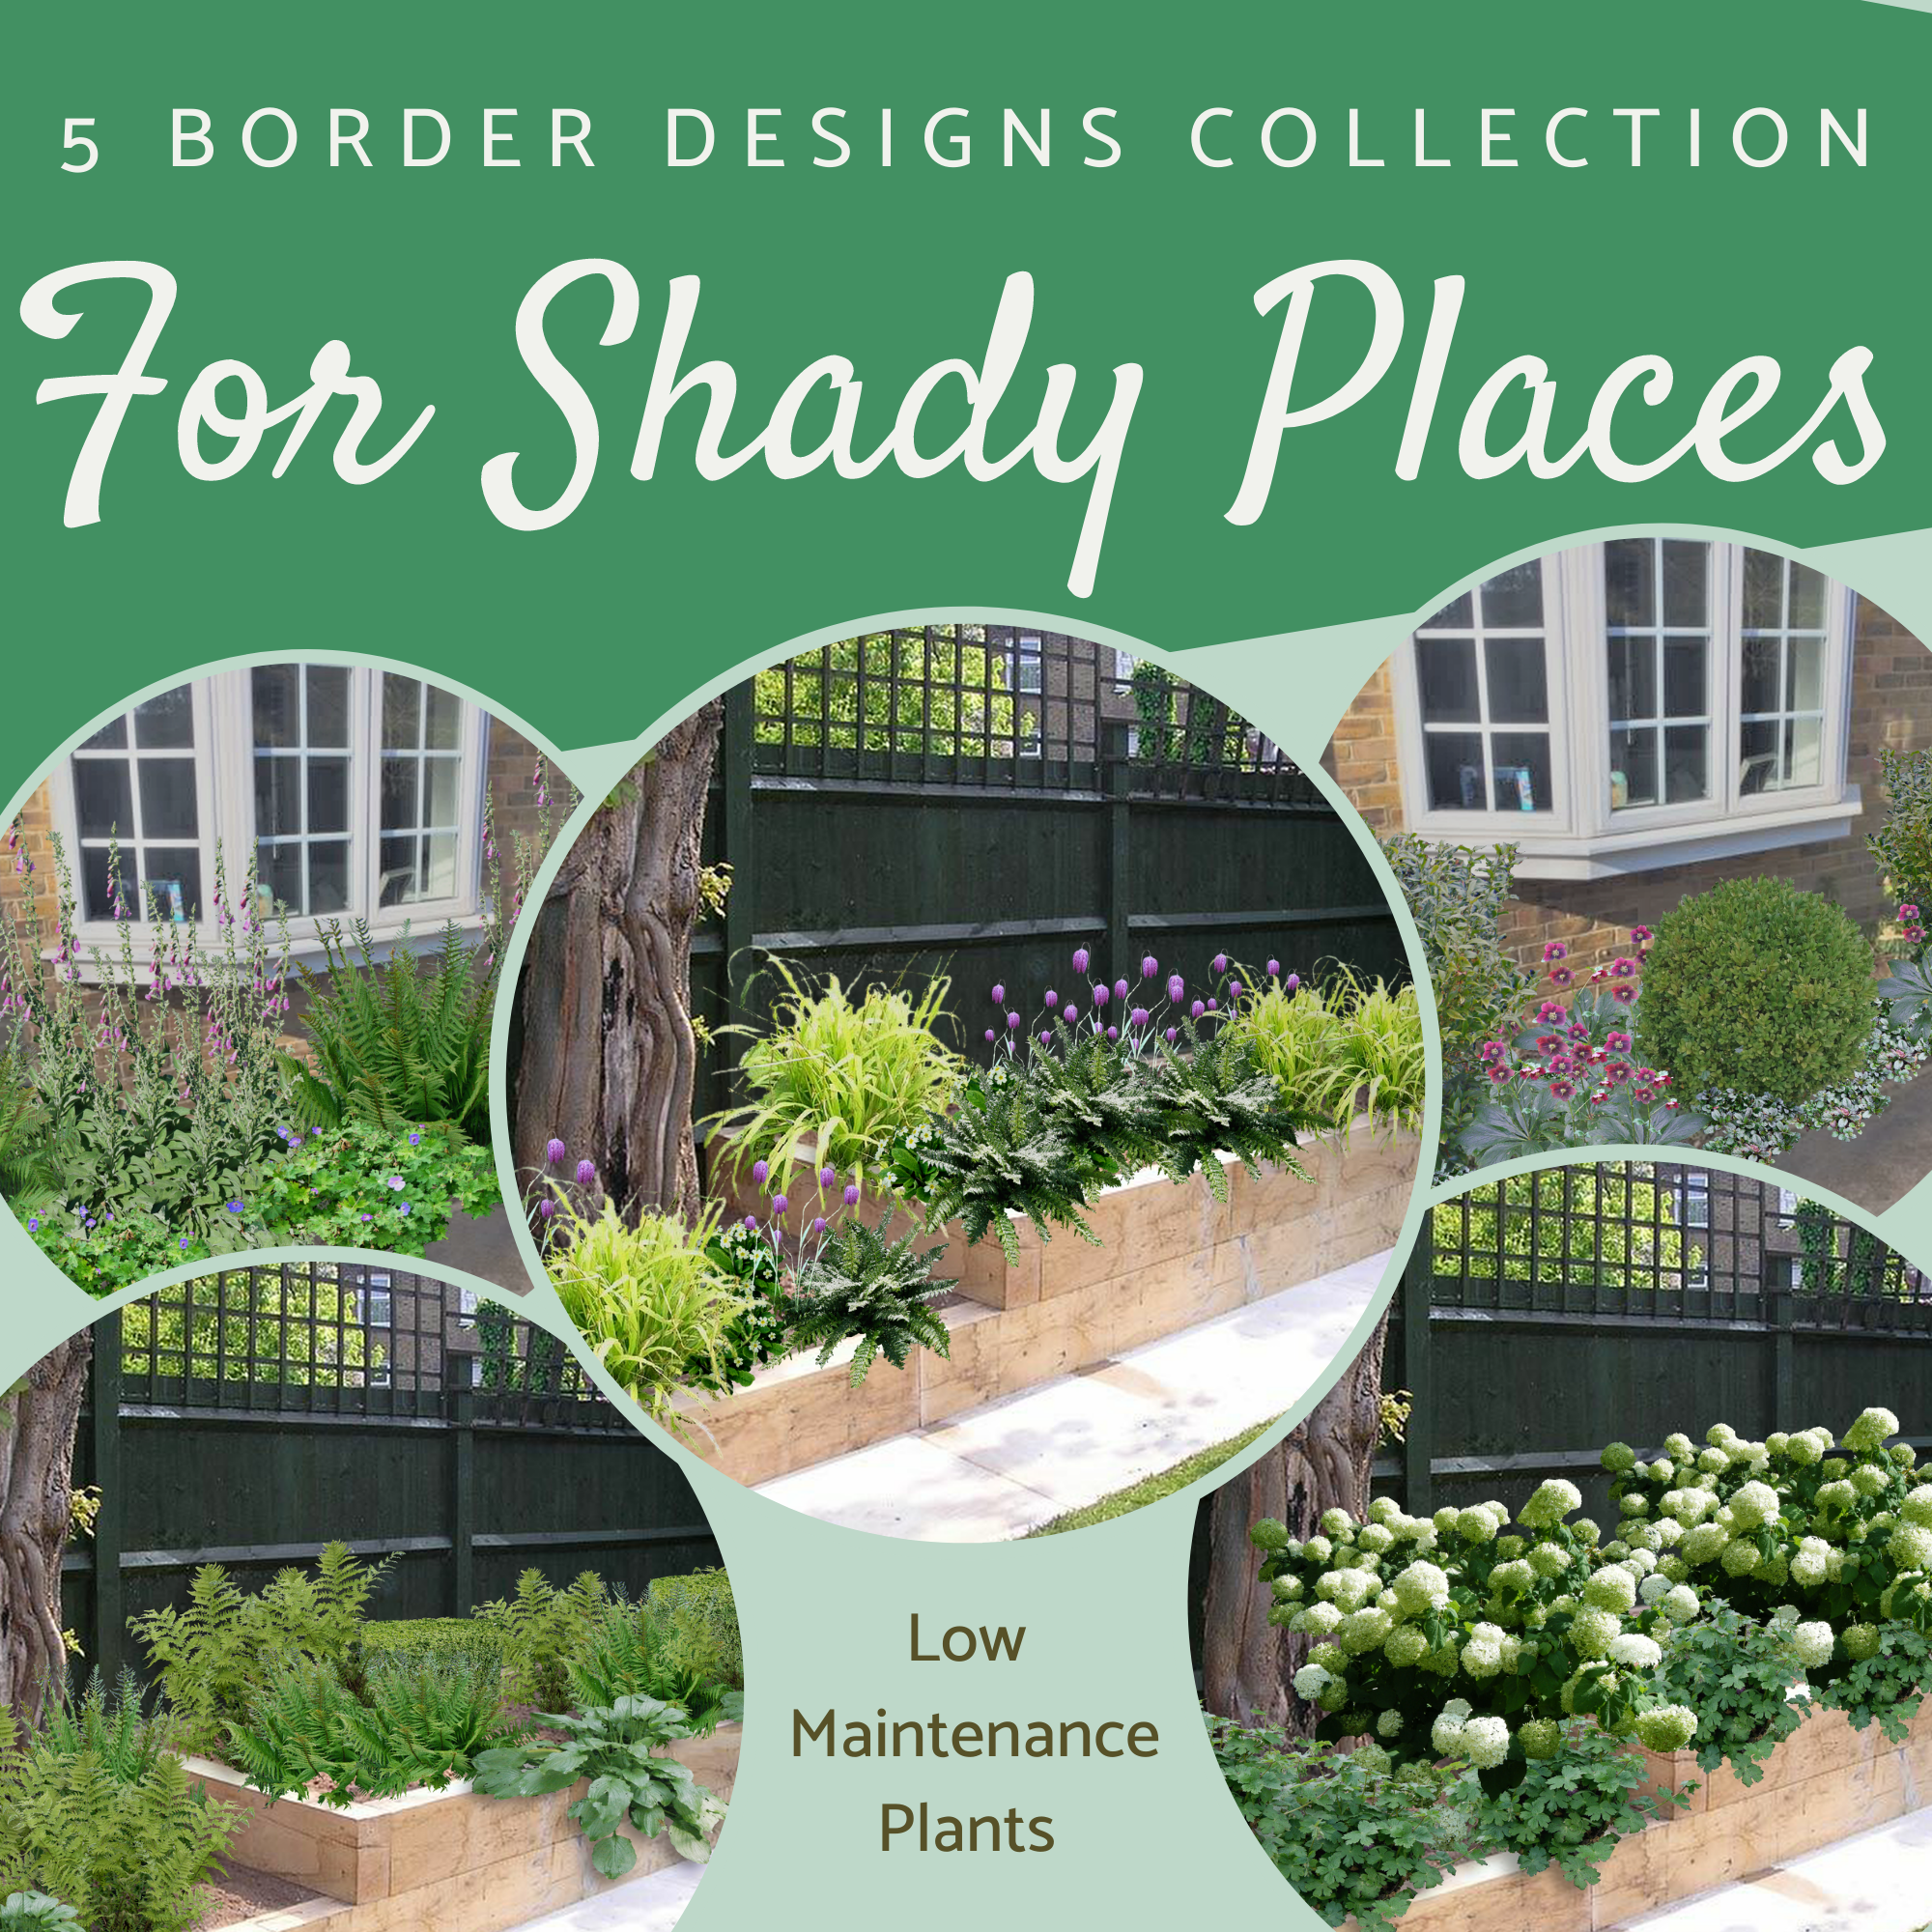 For shady places